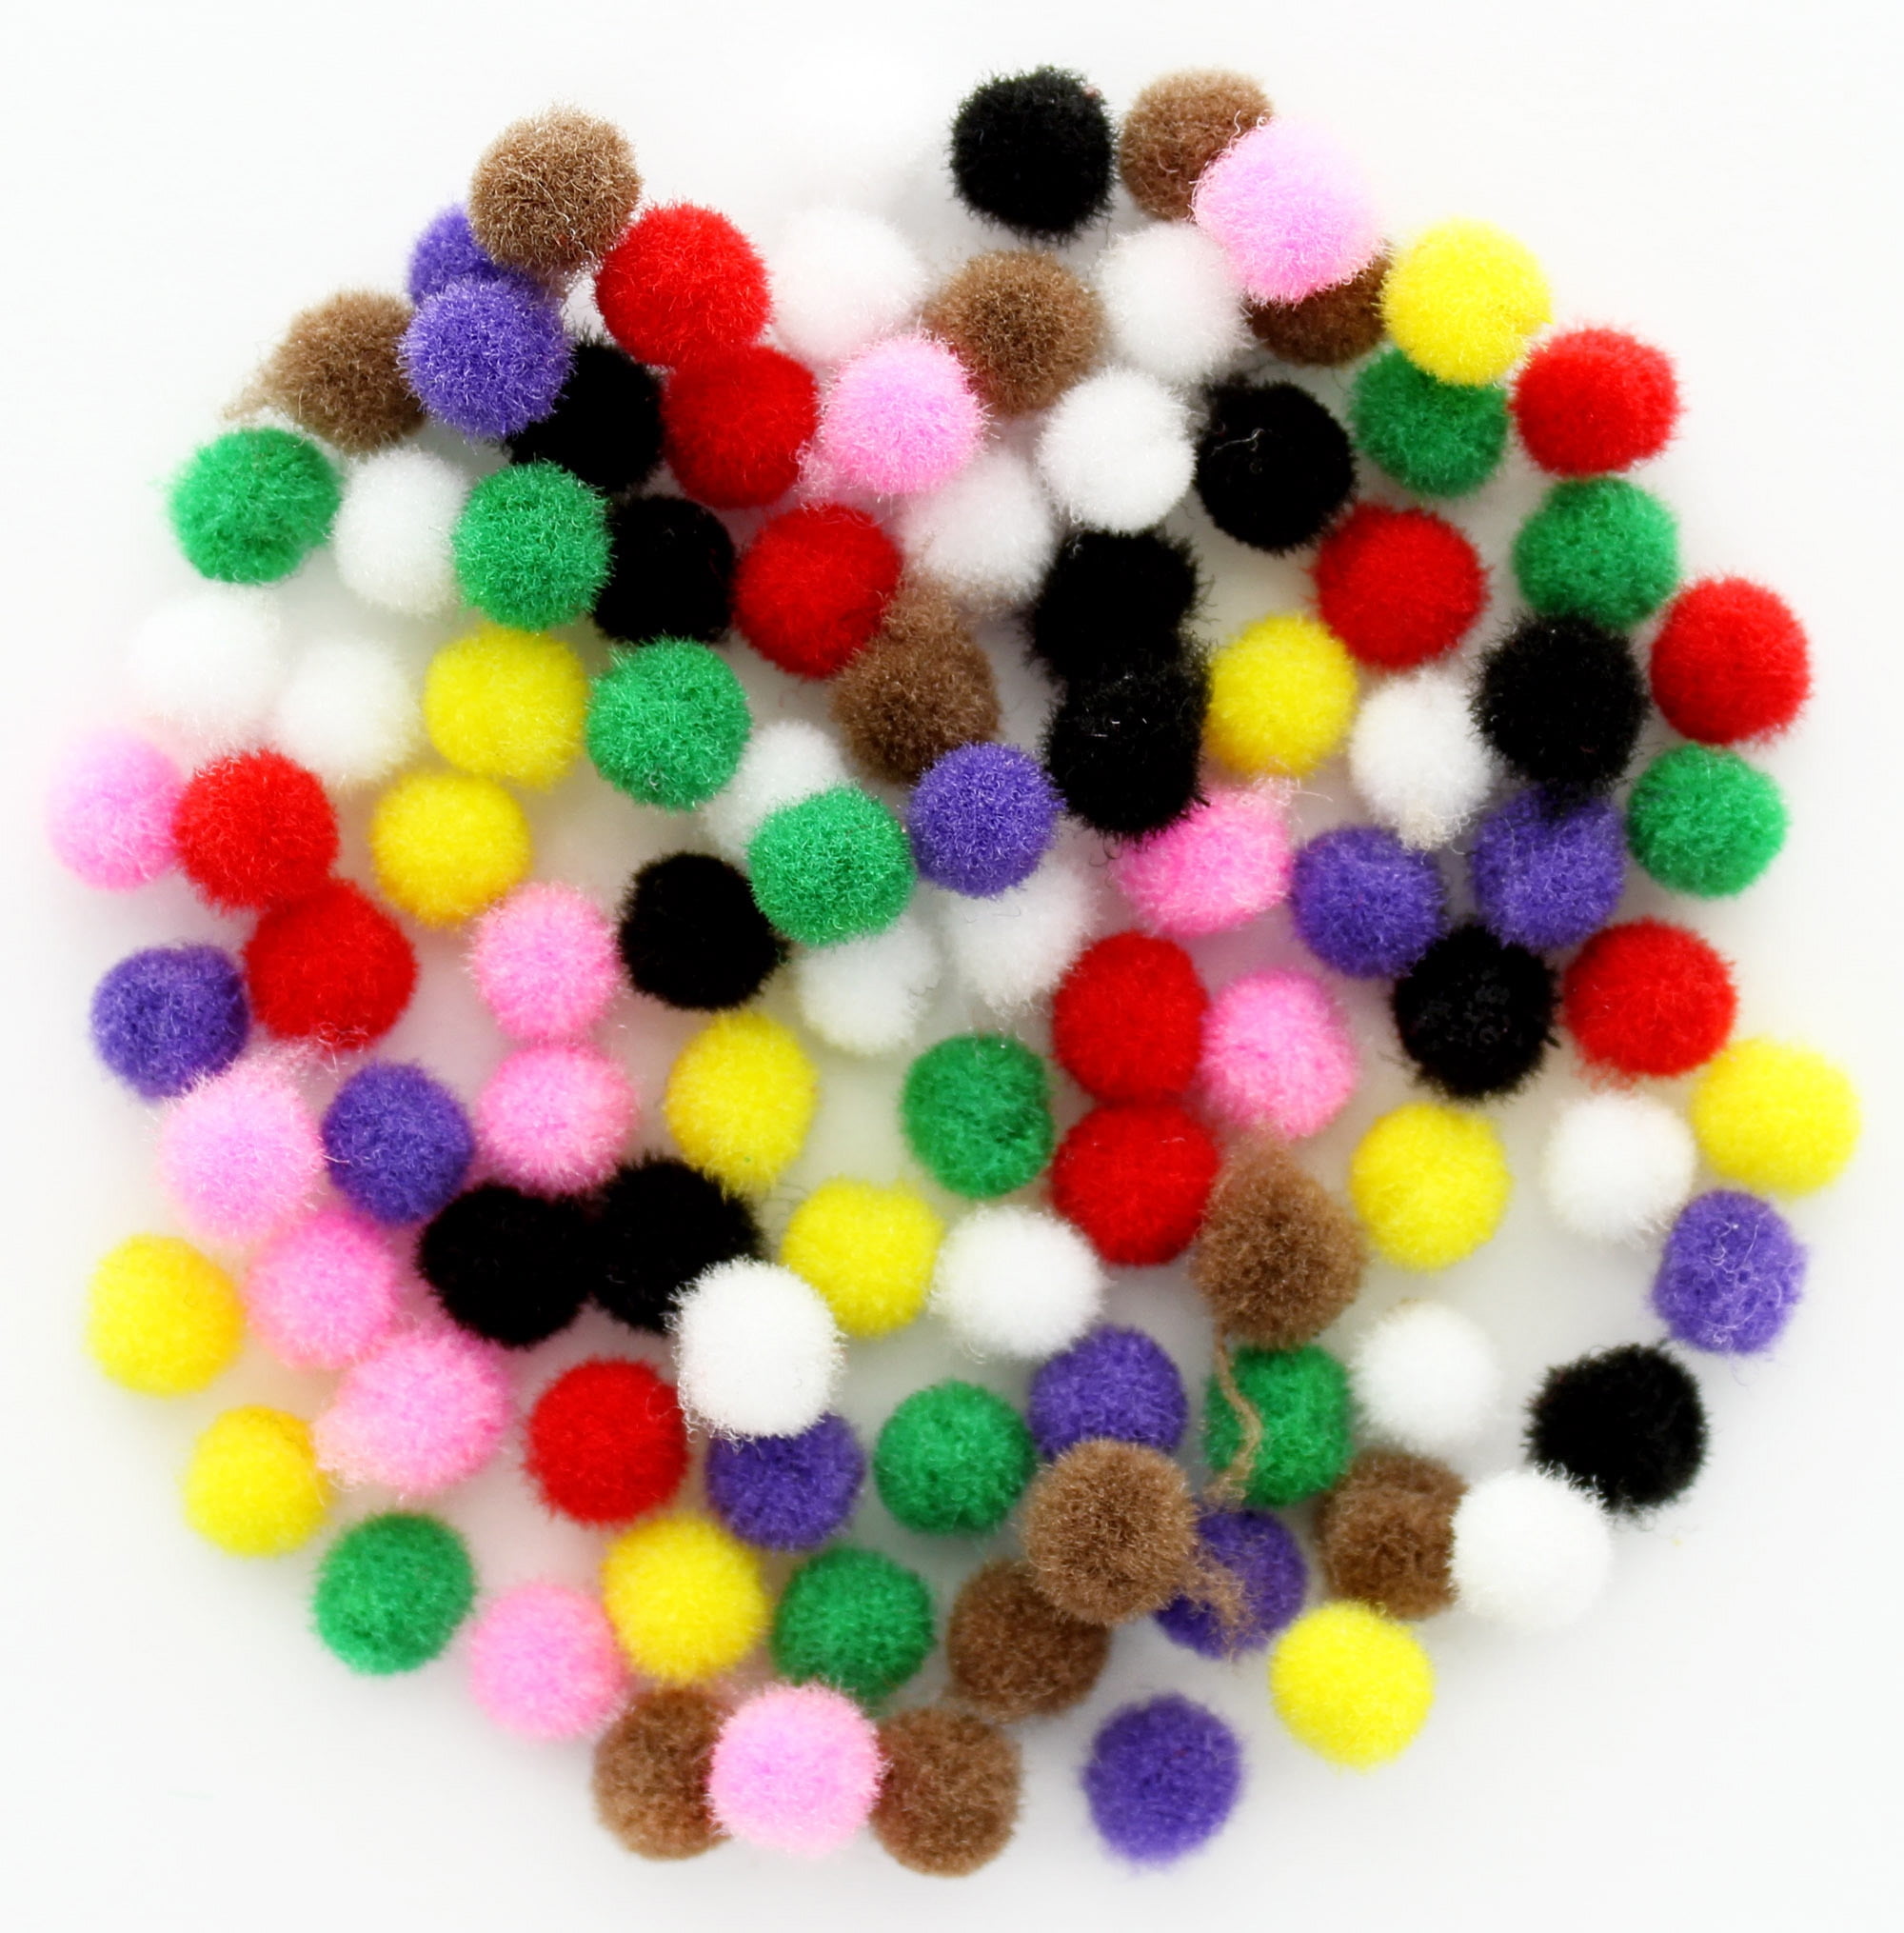 1200pcs Mini Pom Poms Arts And Crafts Back-to-school Gift Puzzle Craft Set,  Colorful Assorted Pompoms, Rainbow Puff Cotton Balls For Crafts, Diy  Project Home Party Holiday Creative Decorations - Toys & Games 